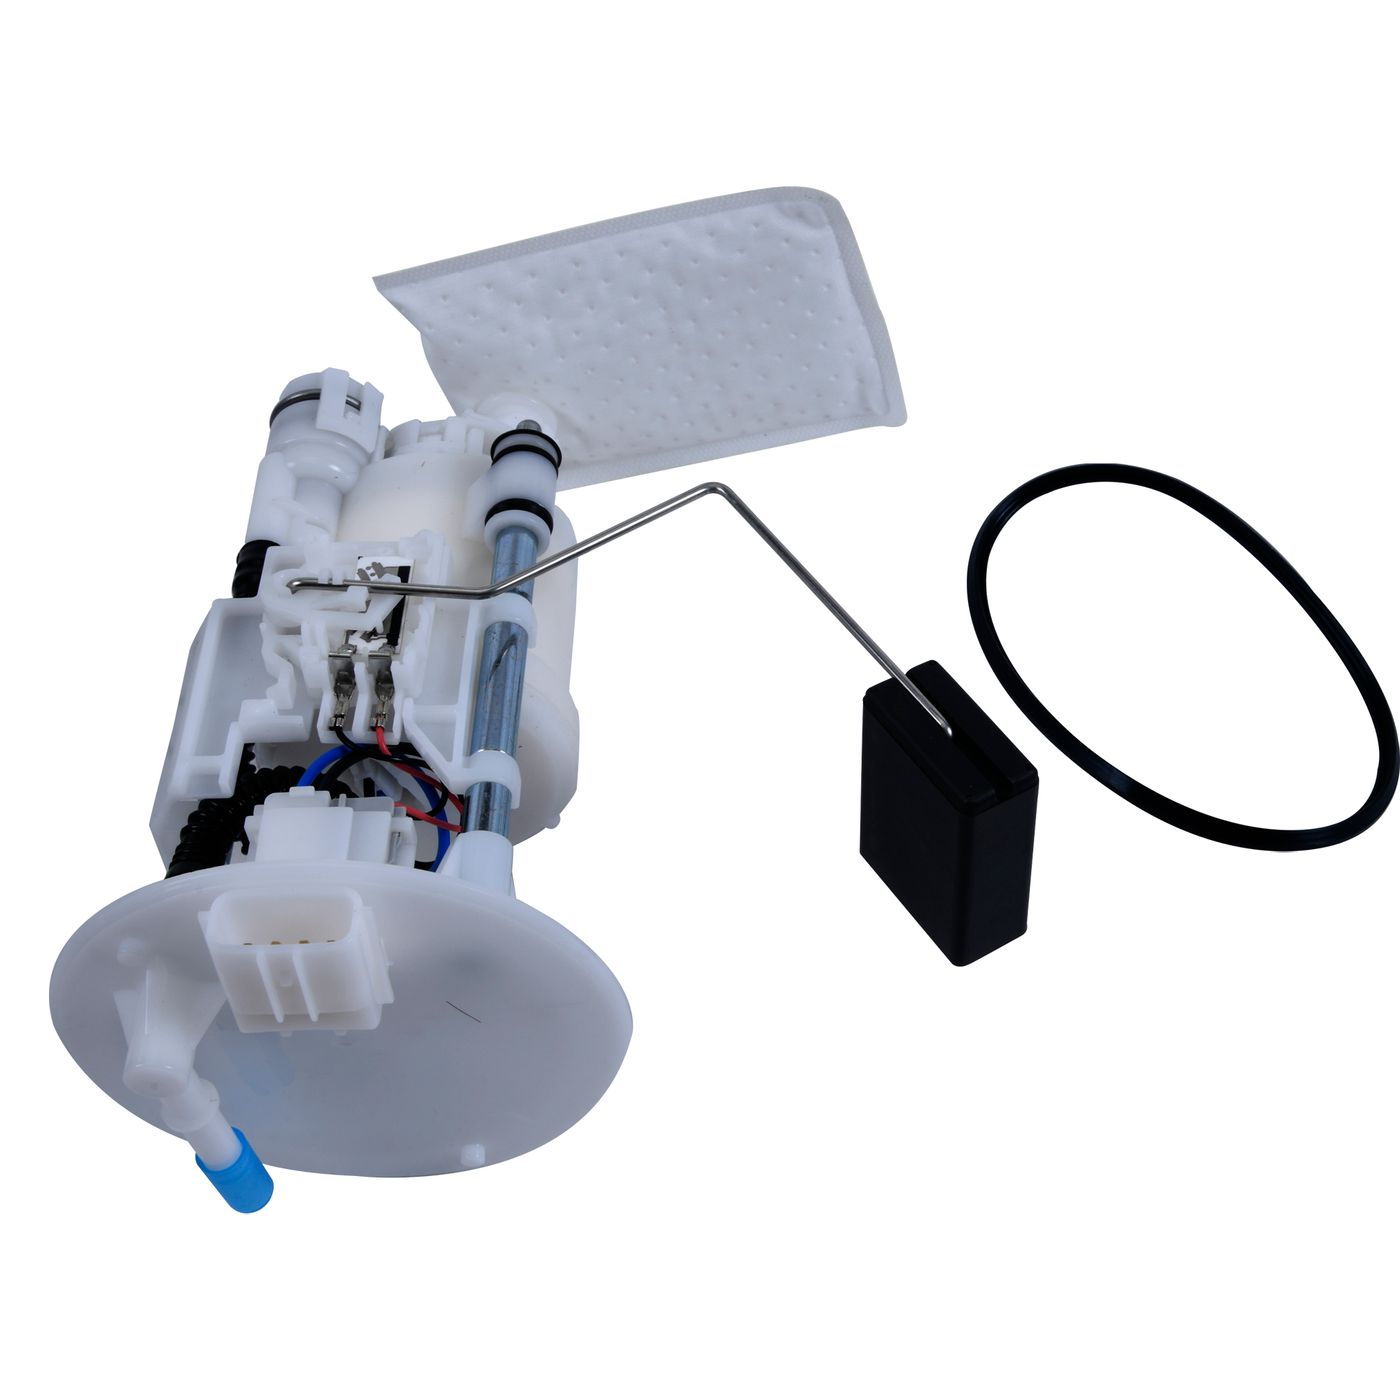 Wrp Fuel Pump Modules - WRP471034 image